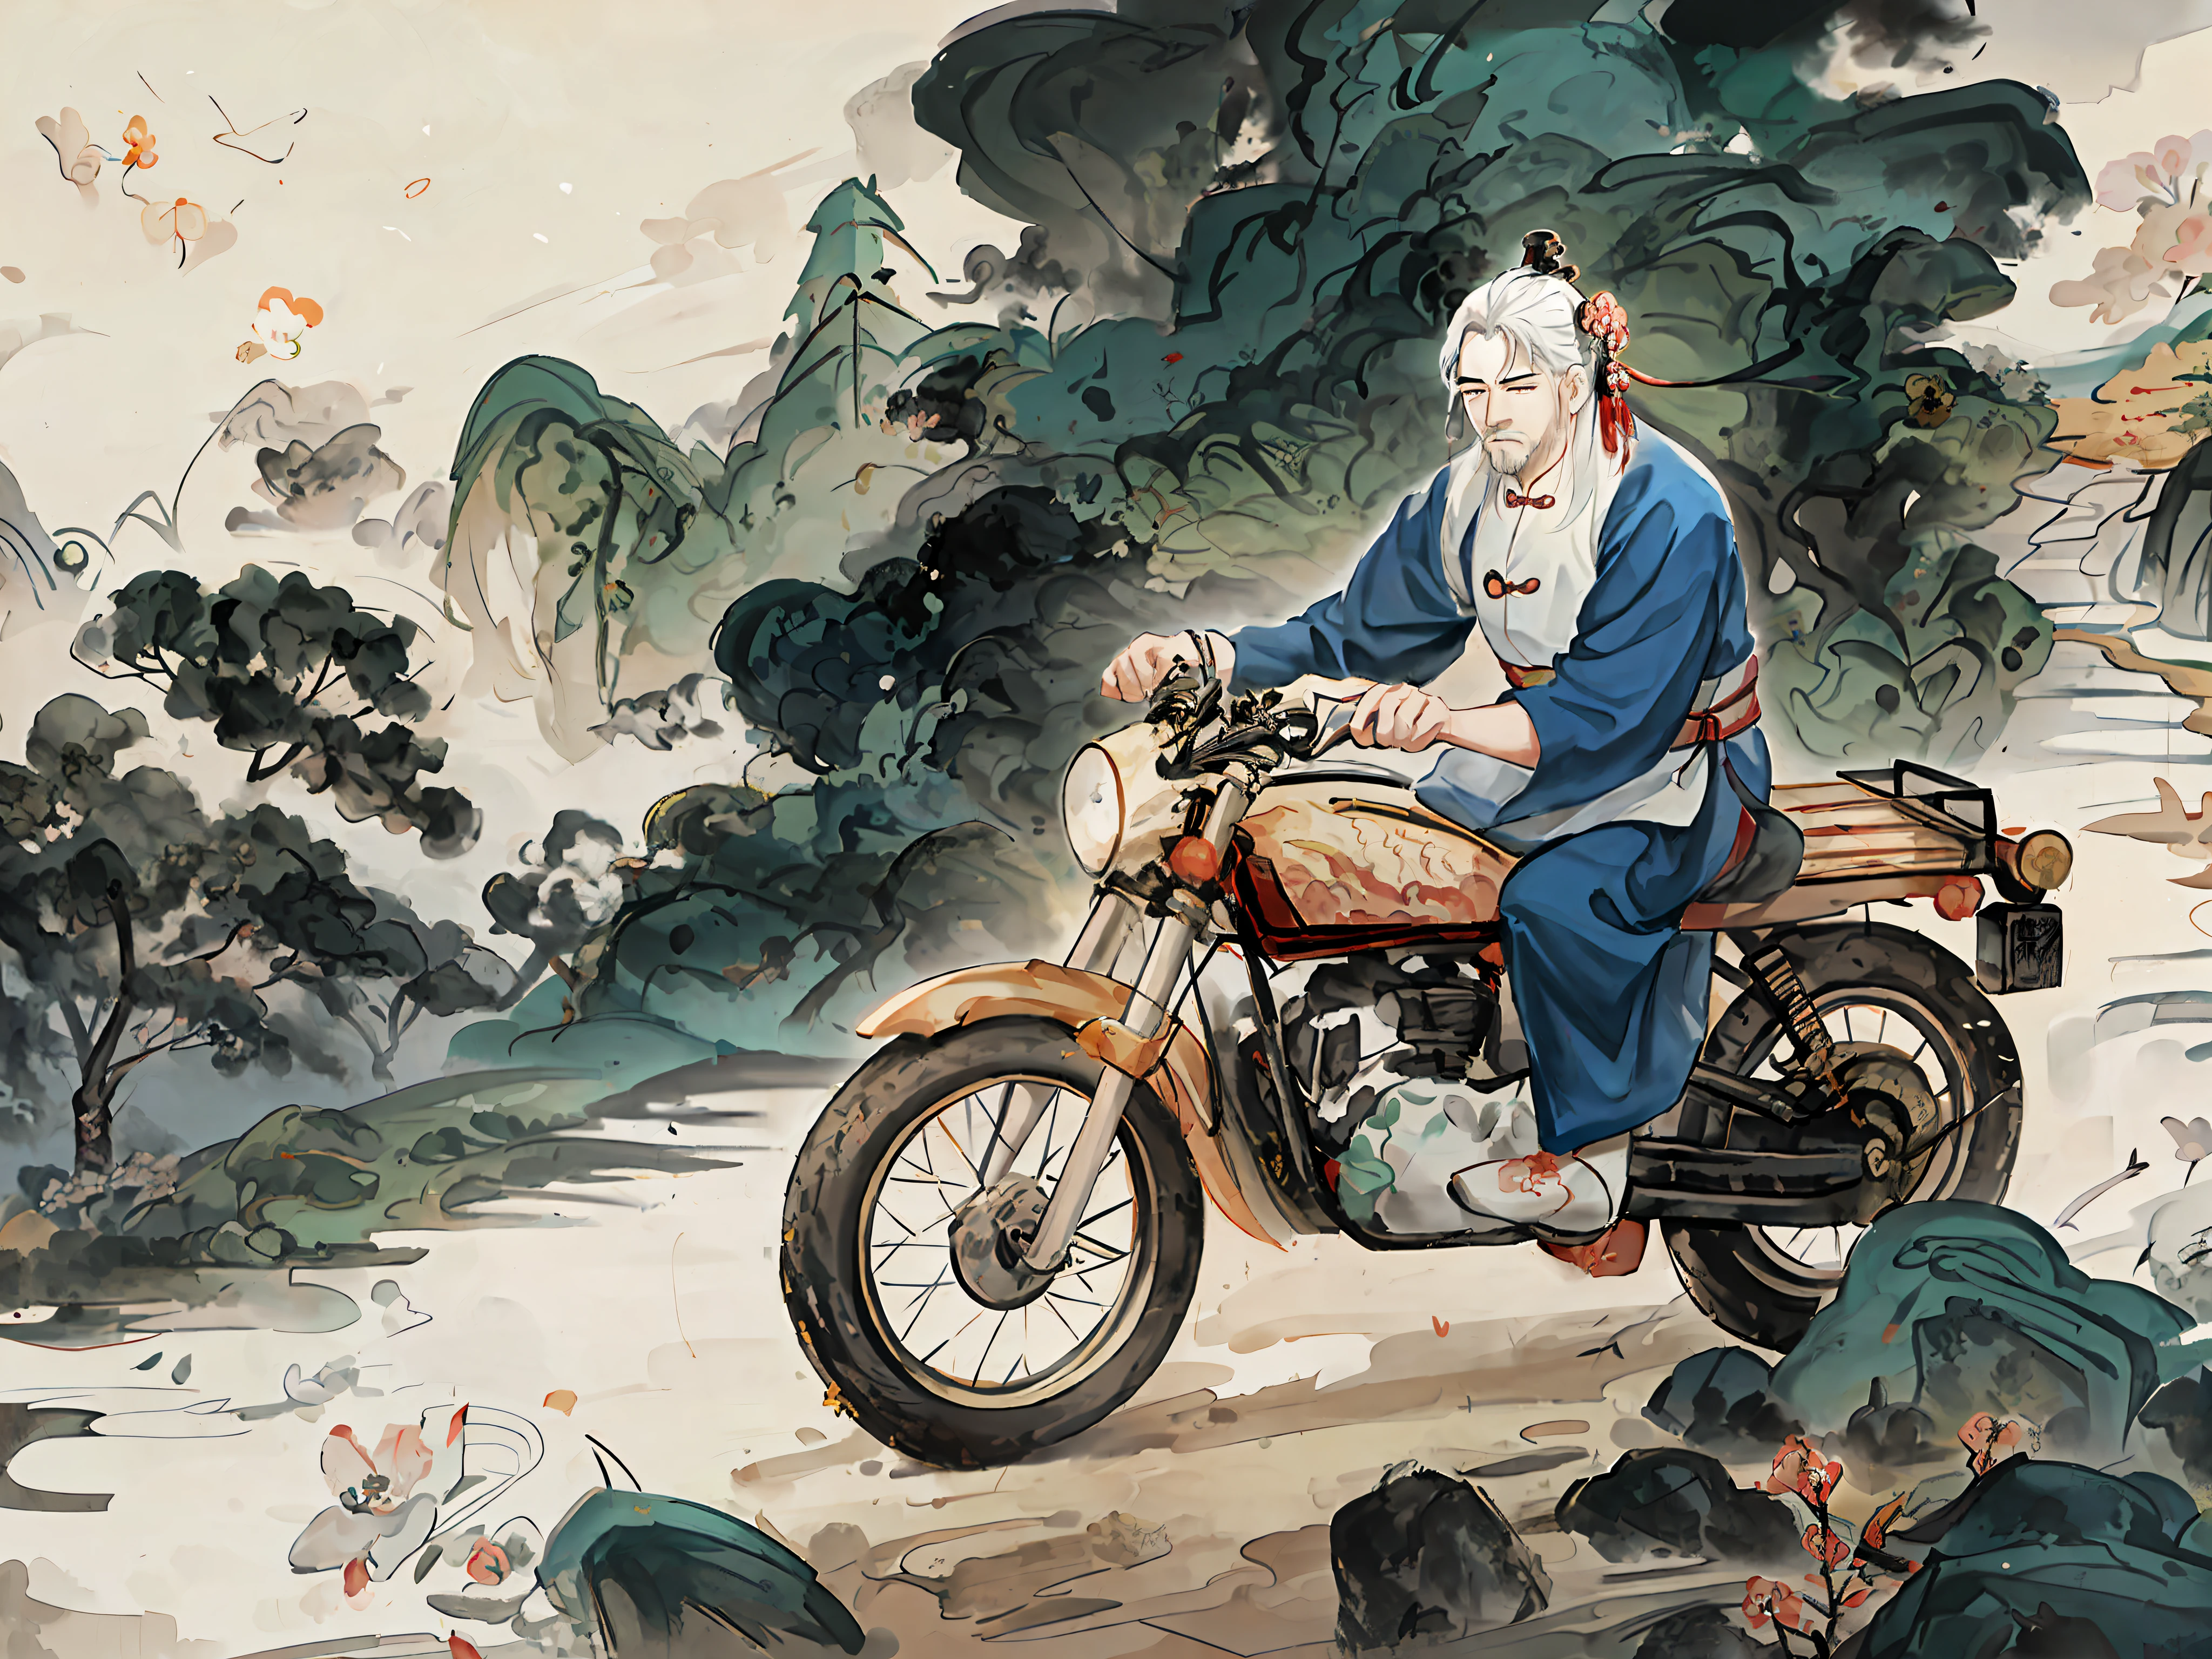 painting of a man on a motorcycle in a landscape with trees, inspired by Wu Daozi, inspired by Huang Binhong, inspired by Wang Zhenpeng, inspired by Hiroshi Honda, inspired by Hu Zaobin, inspired by Yun-Fei Ji, by Li Zai, inspired by Li Shixing, sitting on a motorcycle, inspired by Zhang Shengwen